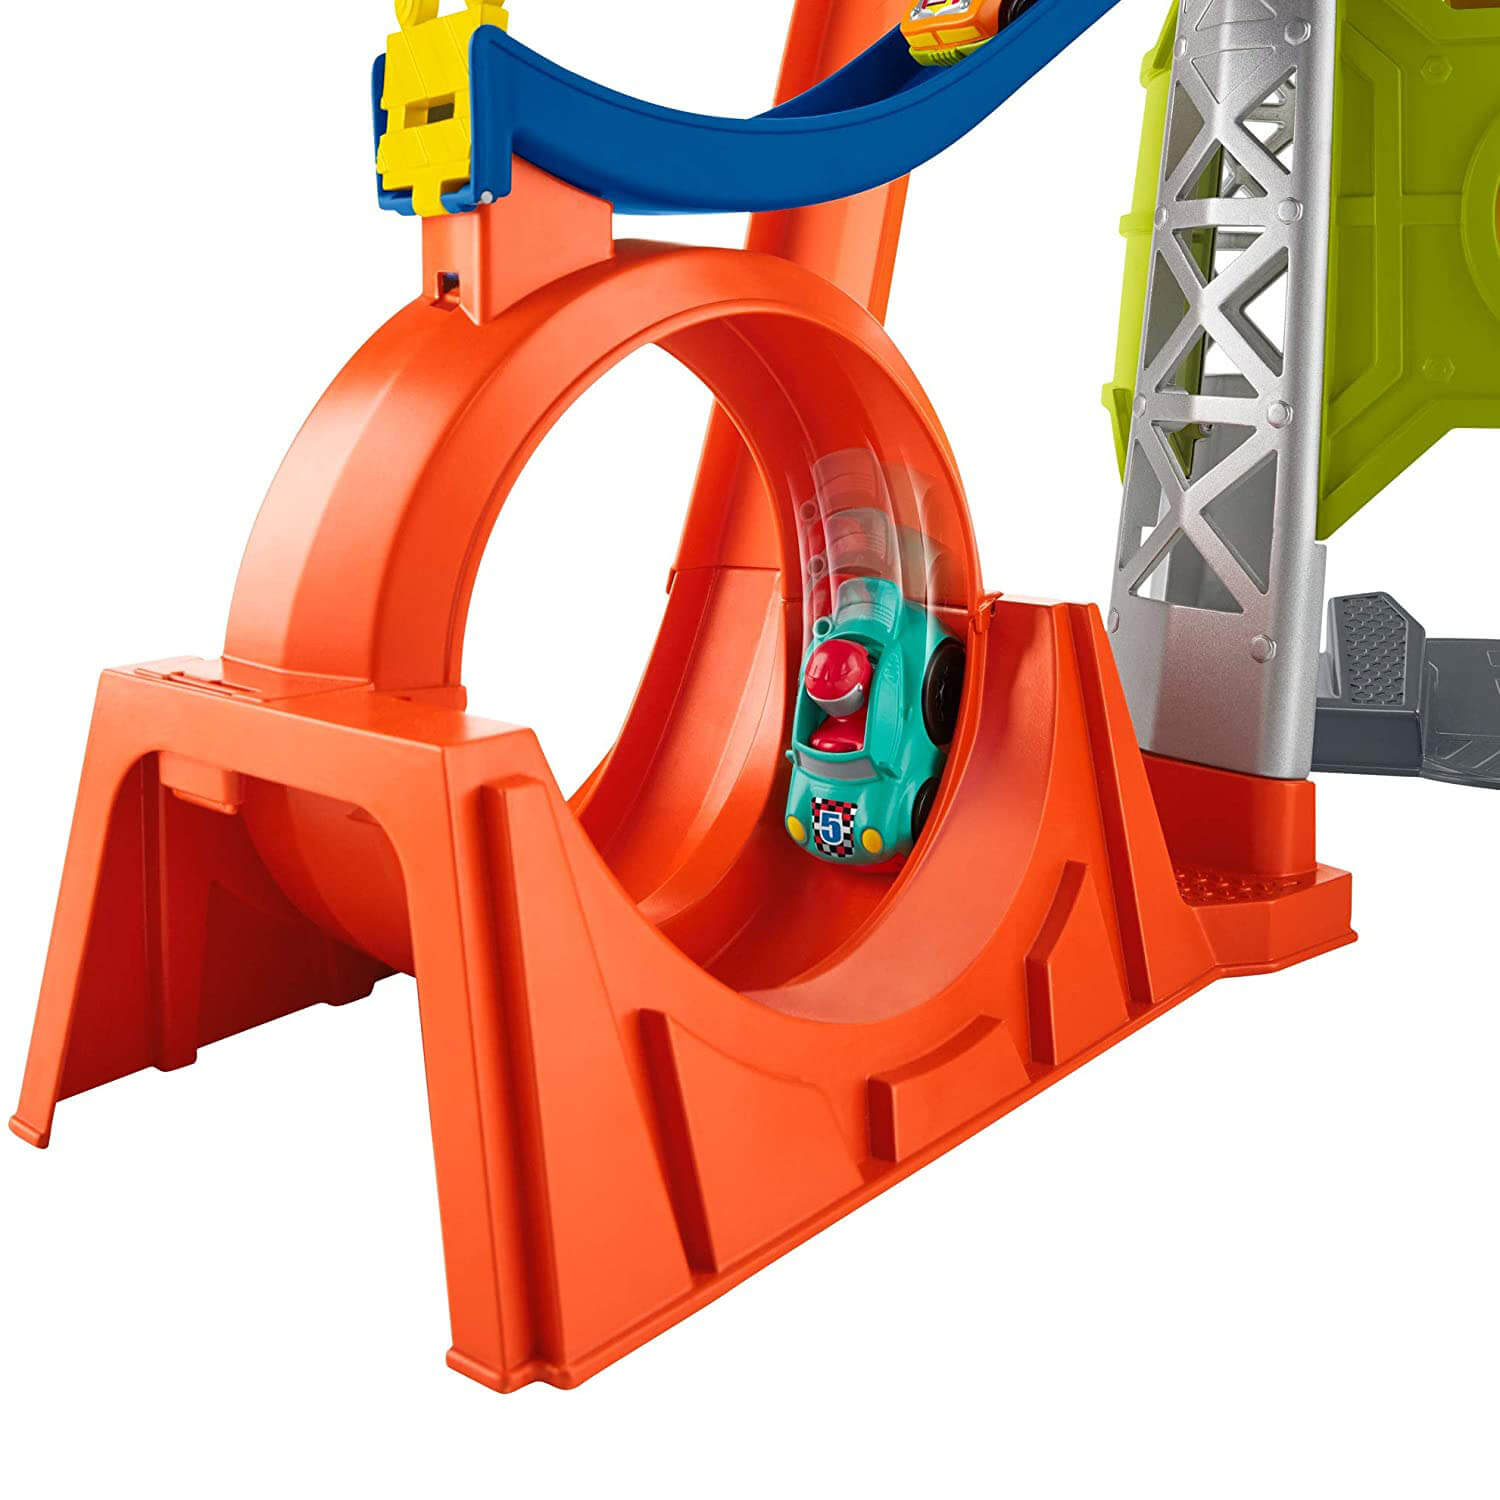 Car going through the loop-the-loop on the Fisher-Price Little People Launch & Loop Raceway